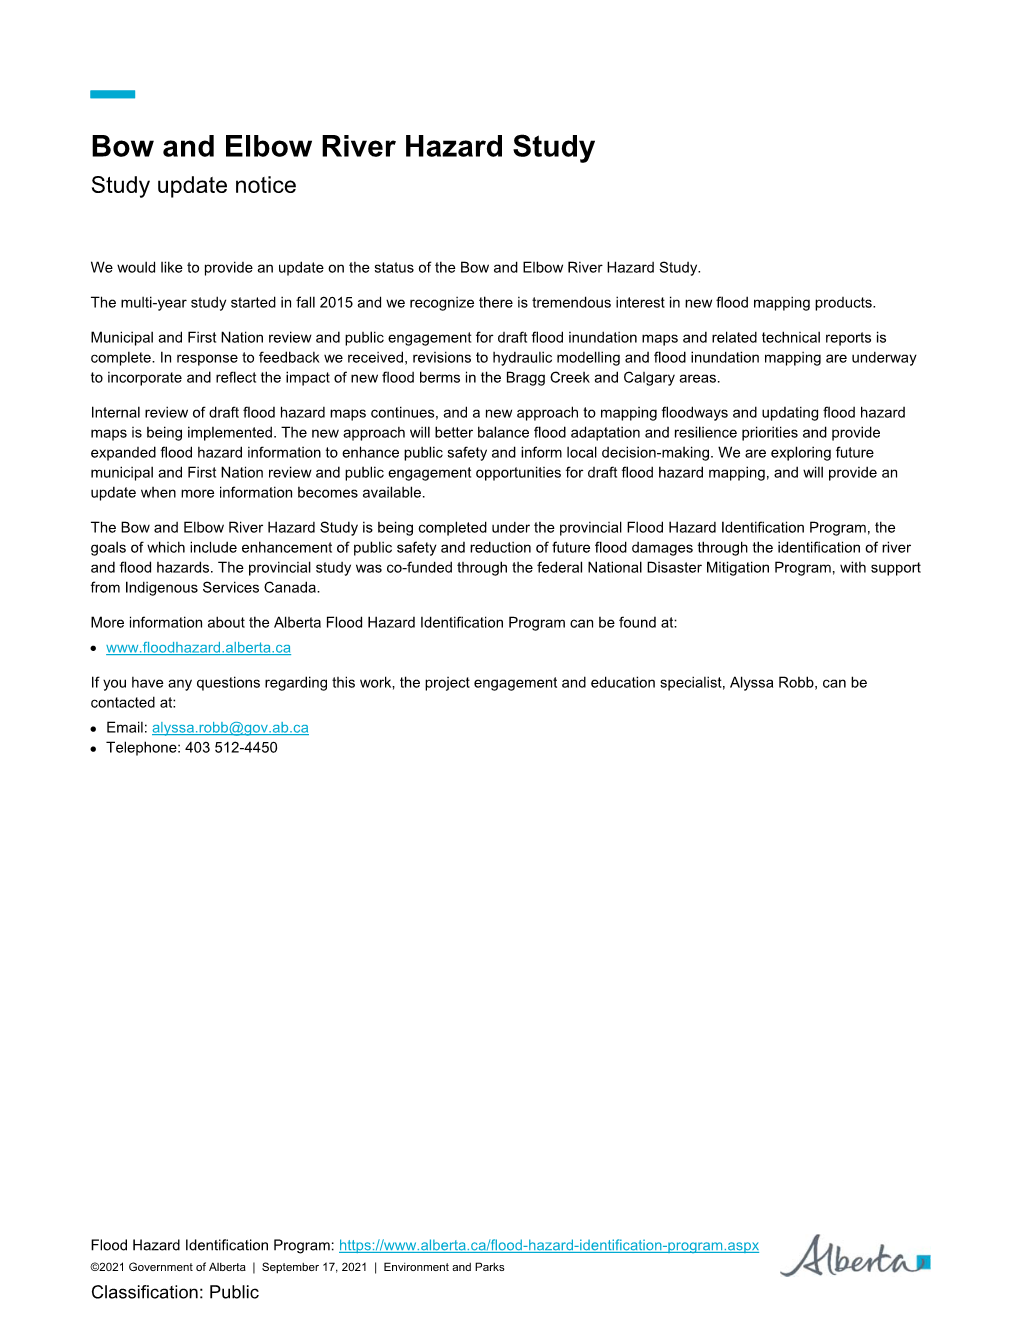 Bow and Elbow River Hazard Study Update Notice